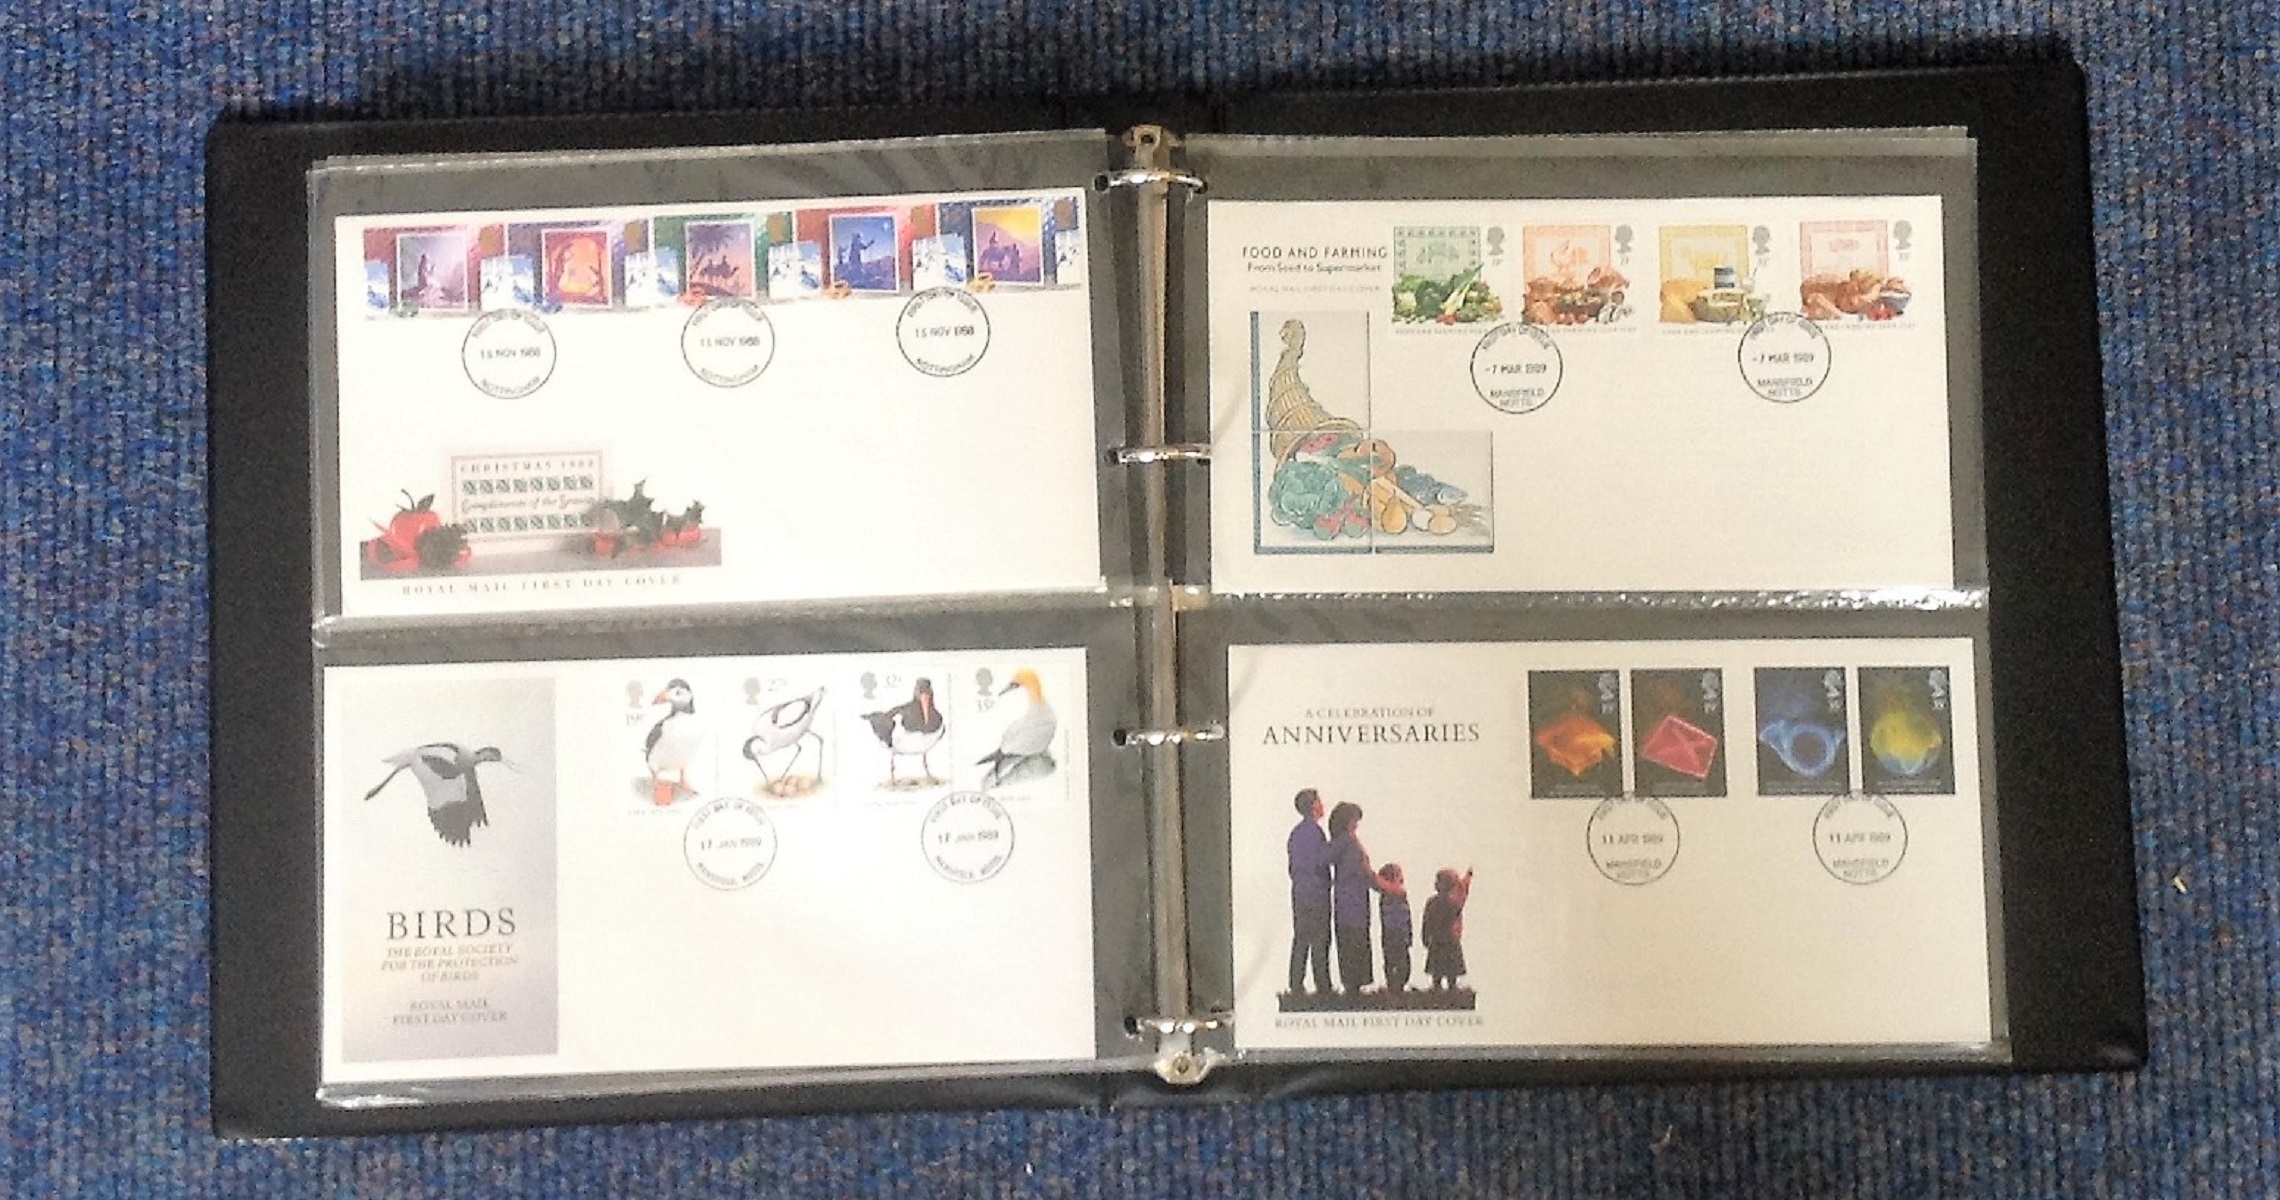 GB Clean FDC collection, 46 covers from 1985, 1989 including many nice Stuart covers in Black 4 ring - Image 6 of 6